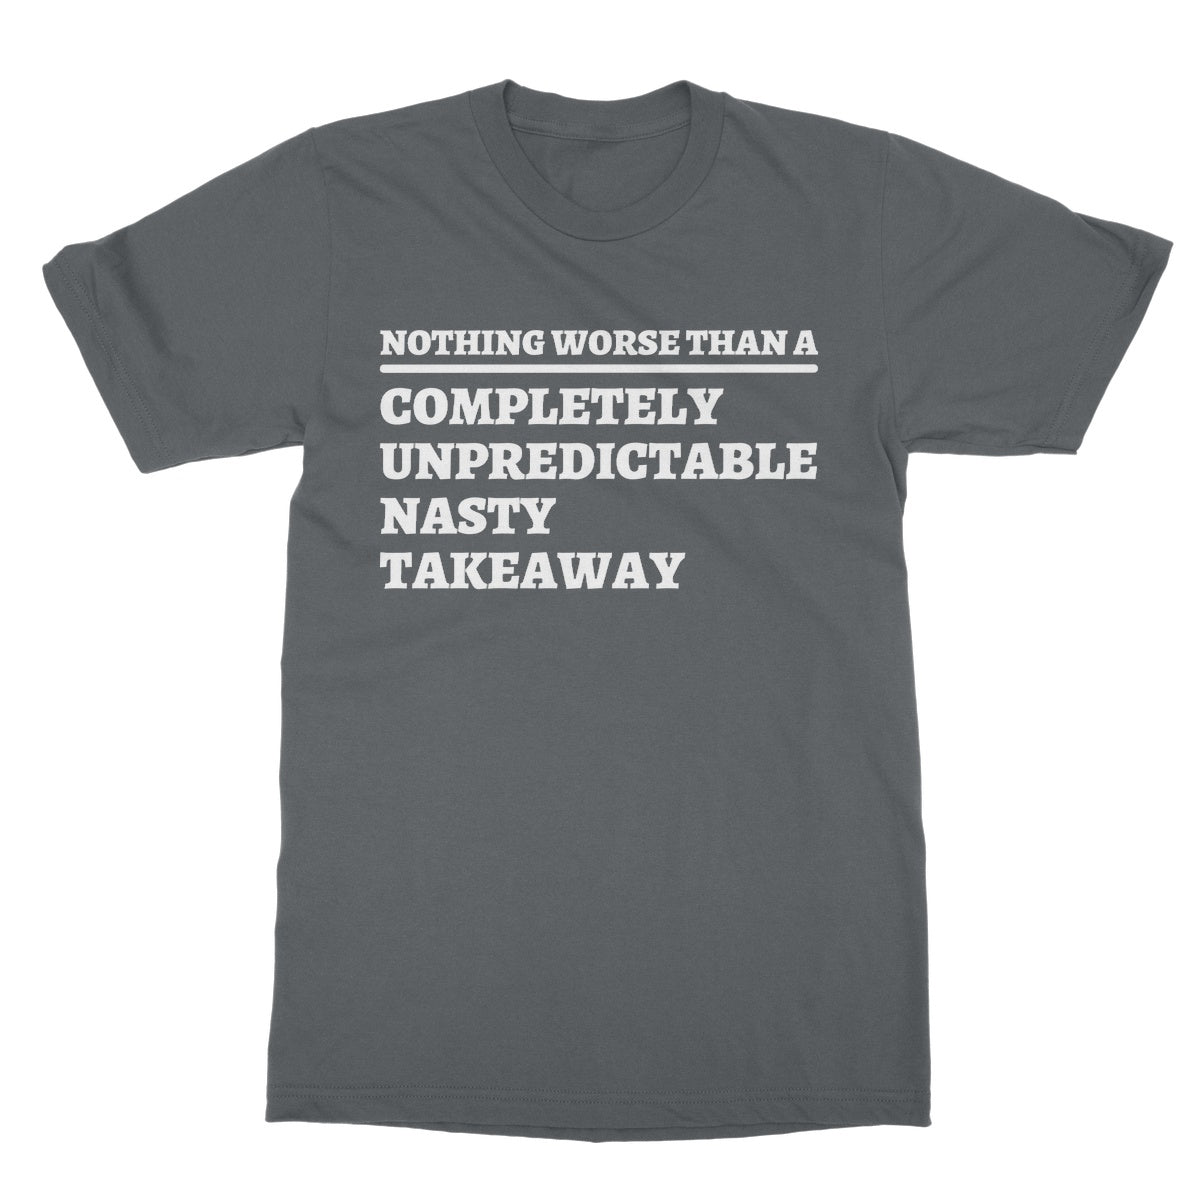 completely unreliable nasty takeaway t shirt grey